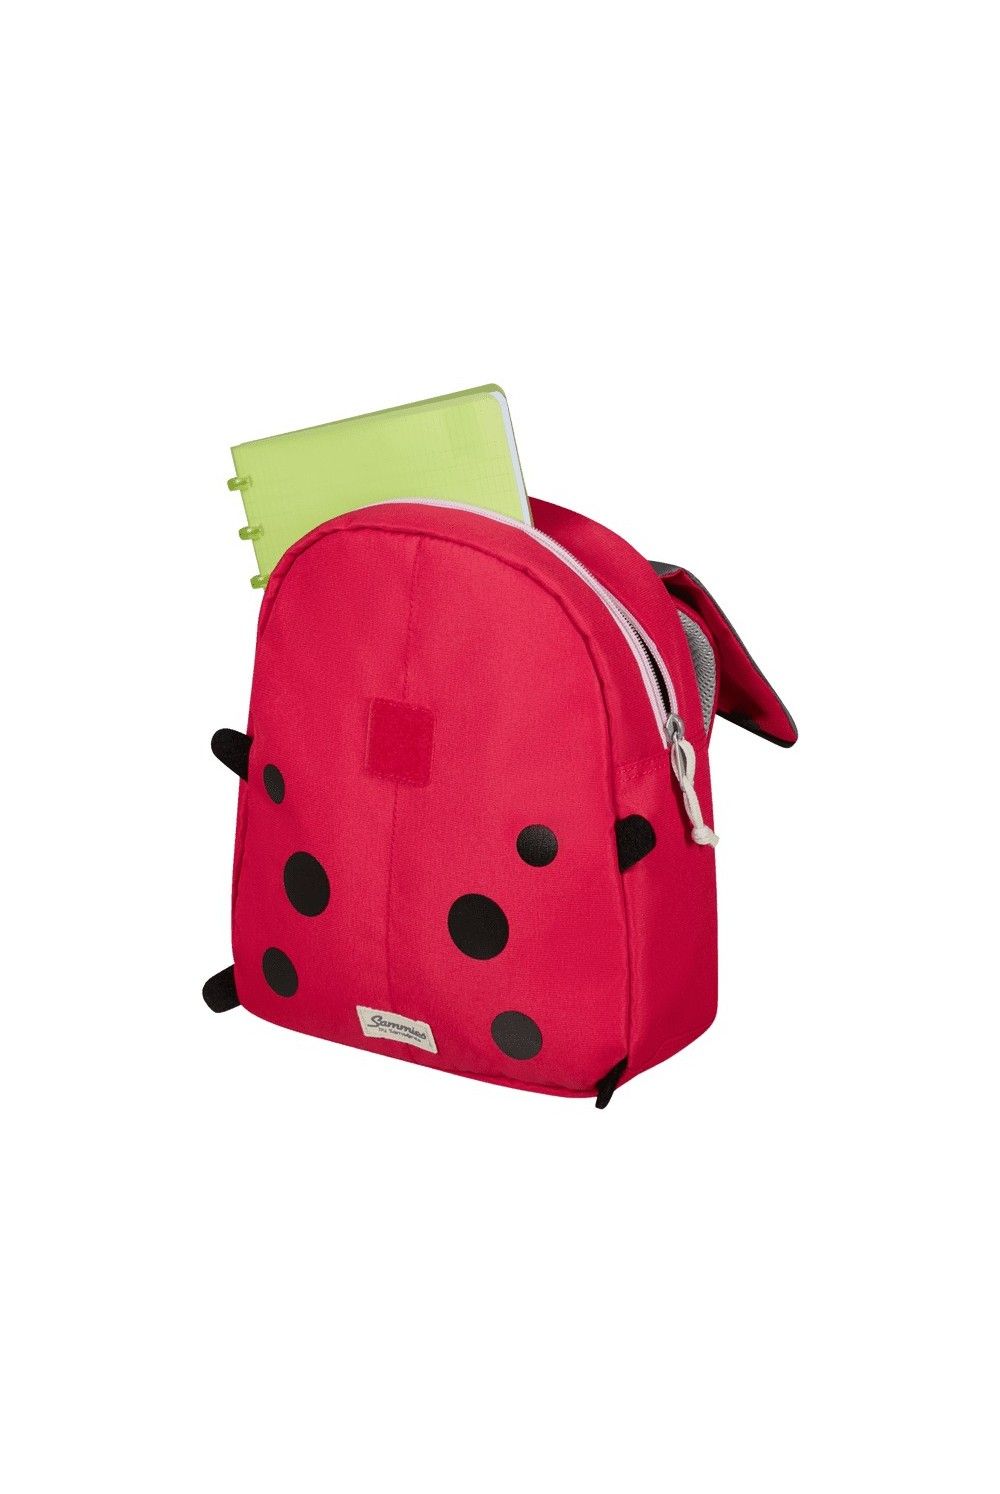 Backpack for kids Happy Sammies Ladybug Lally S